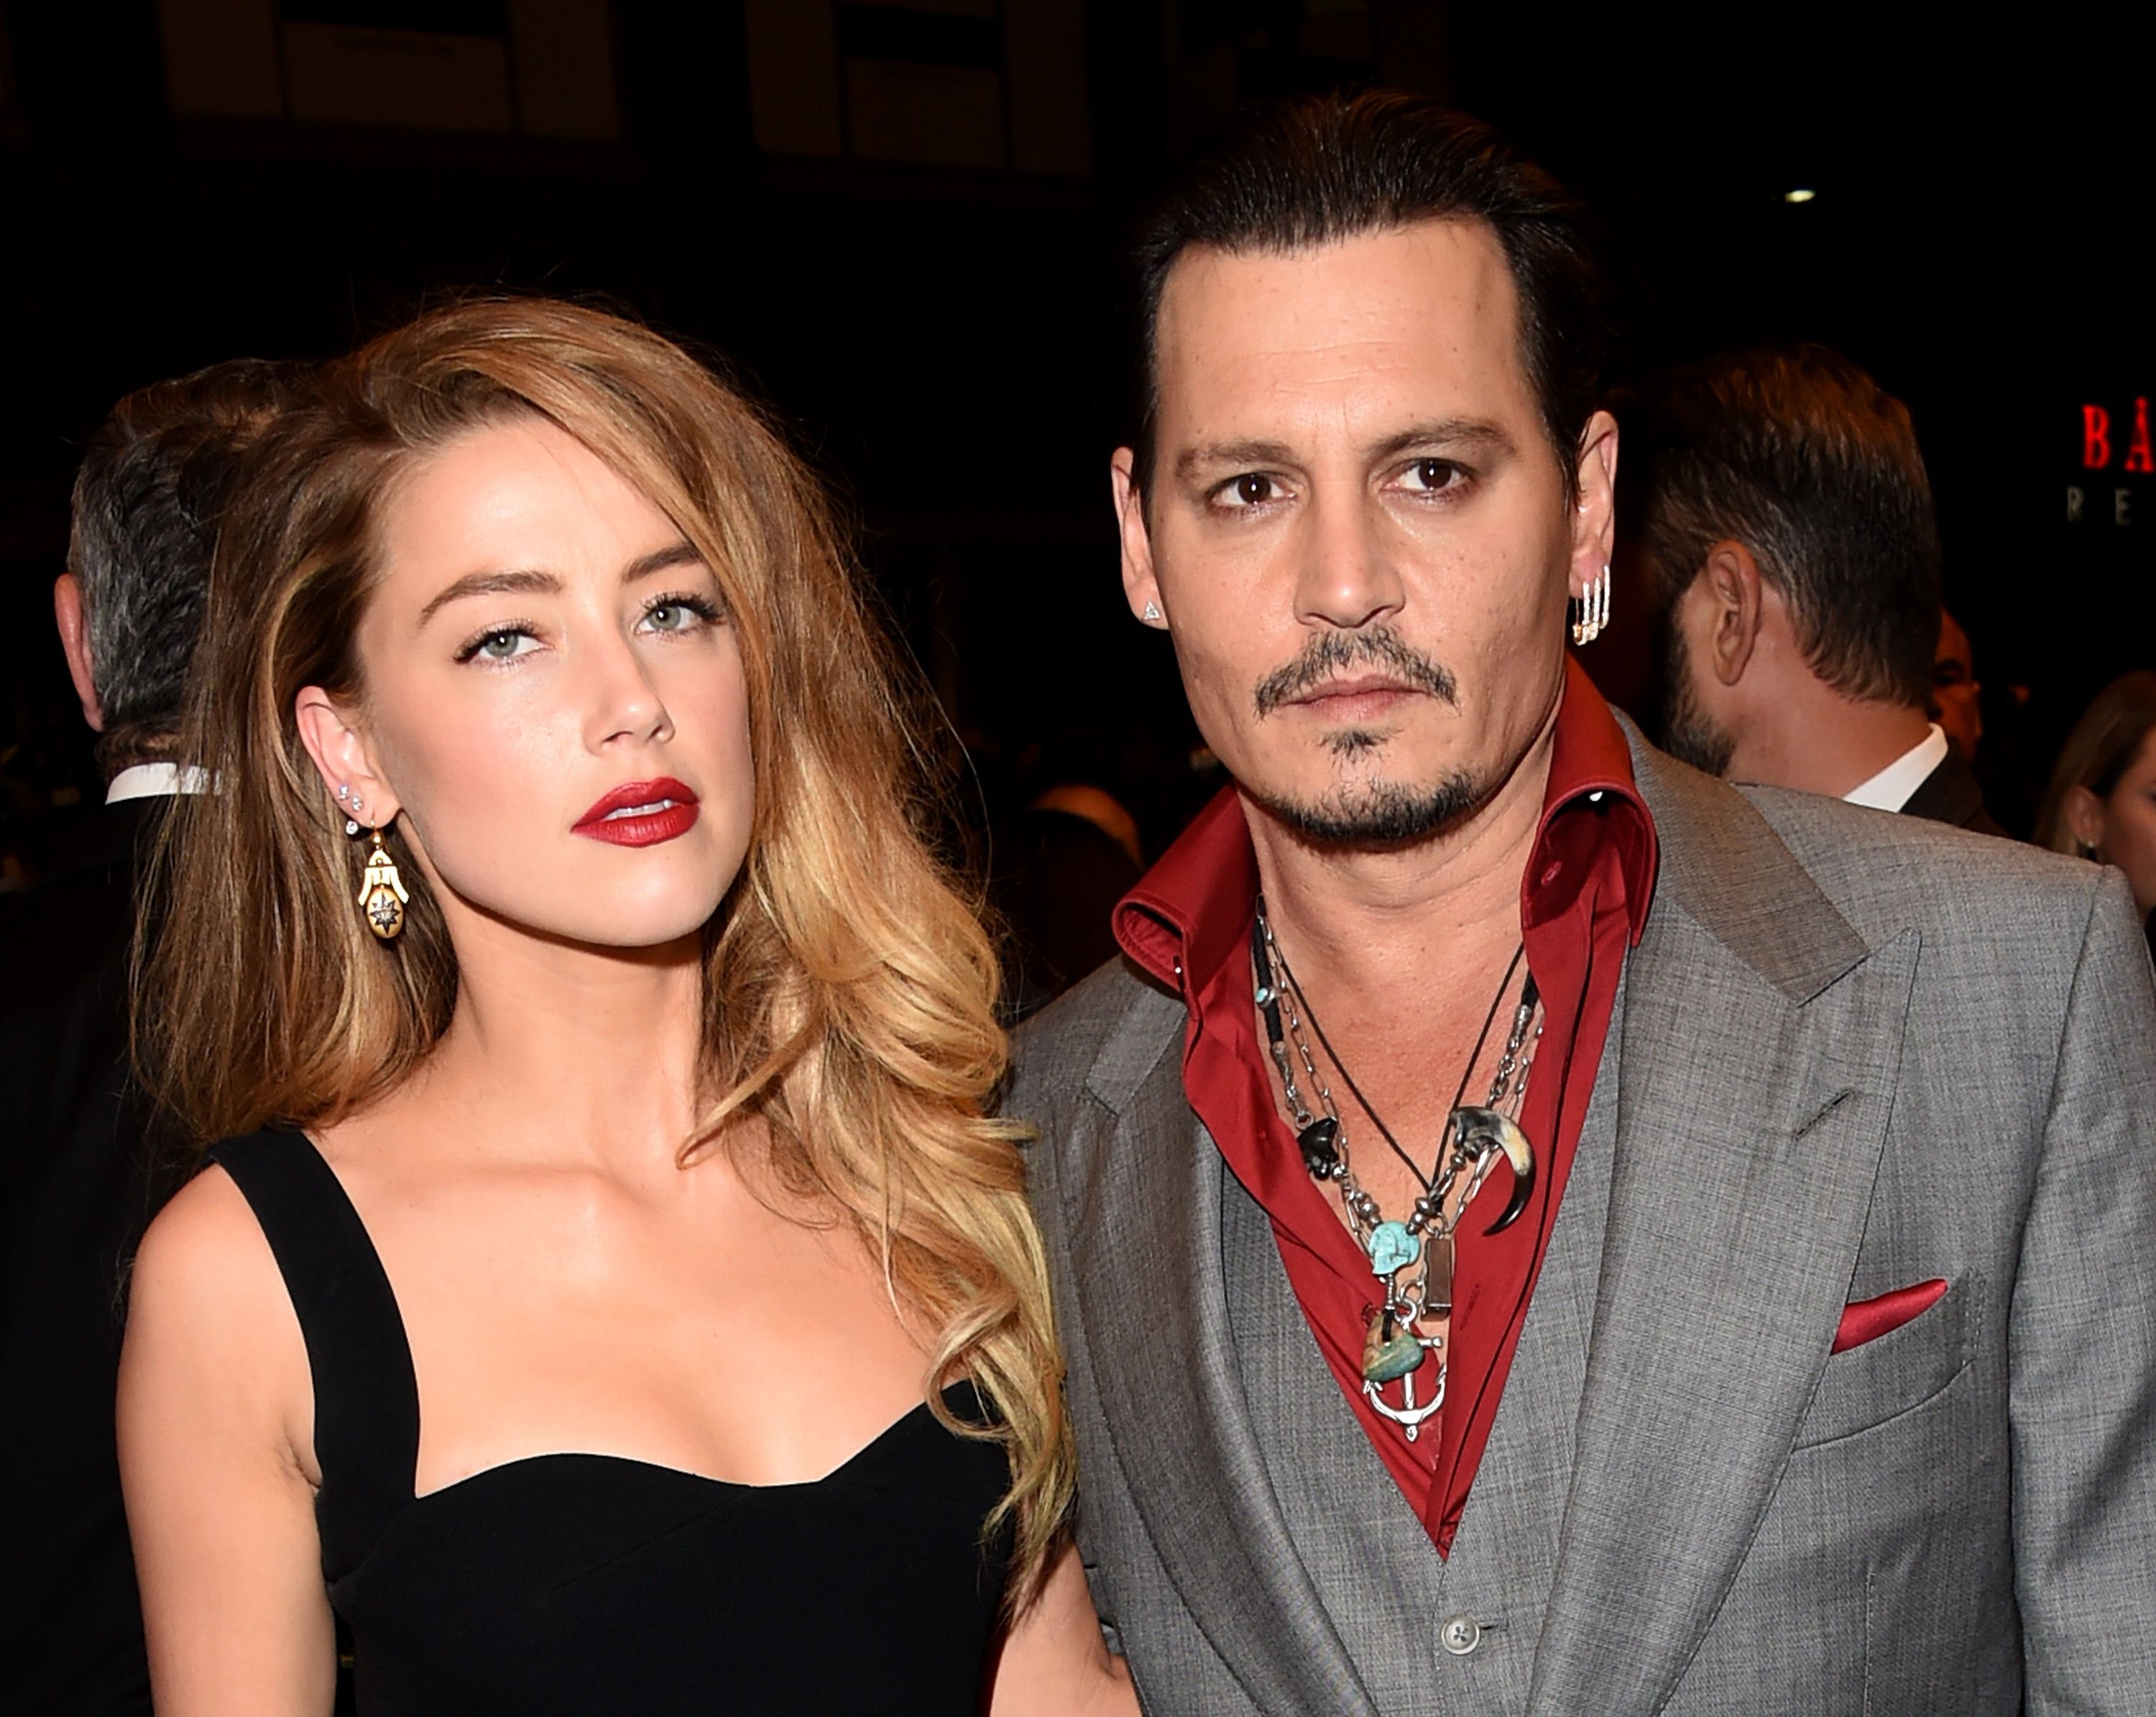 Amber Heard and Johnny Depp during the "Black Mass" premiere at the 2015 Toronto International Film Festival at The Elgin on September 14, 2015, in Toronto, Canada. | Source: Getty Images